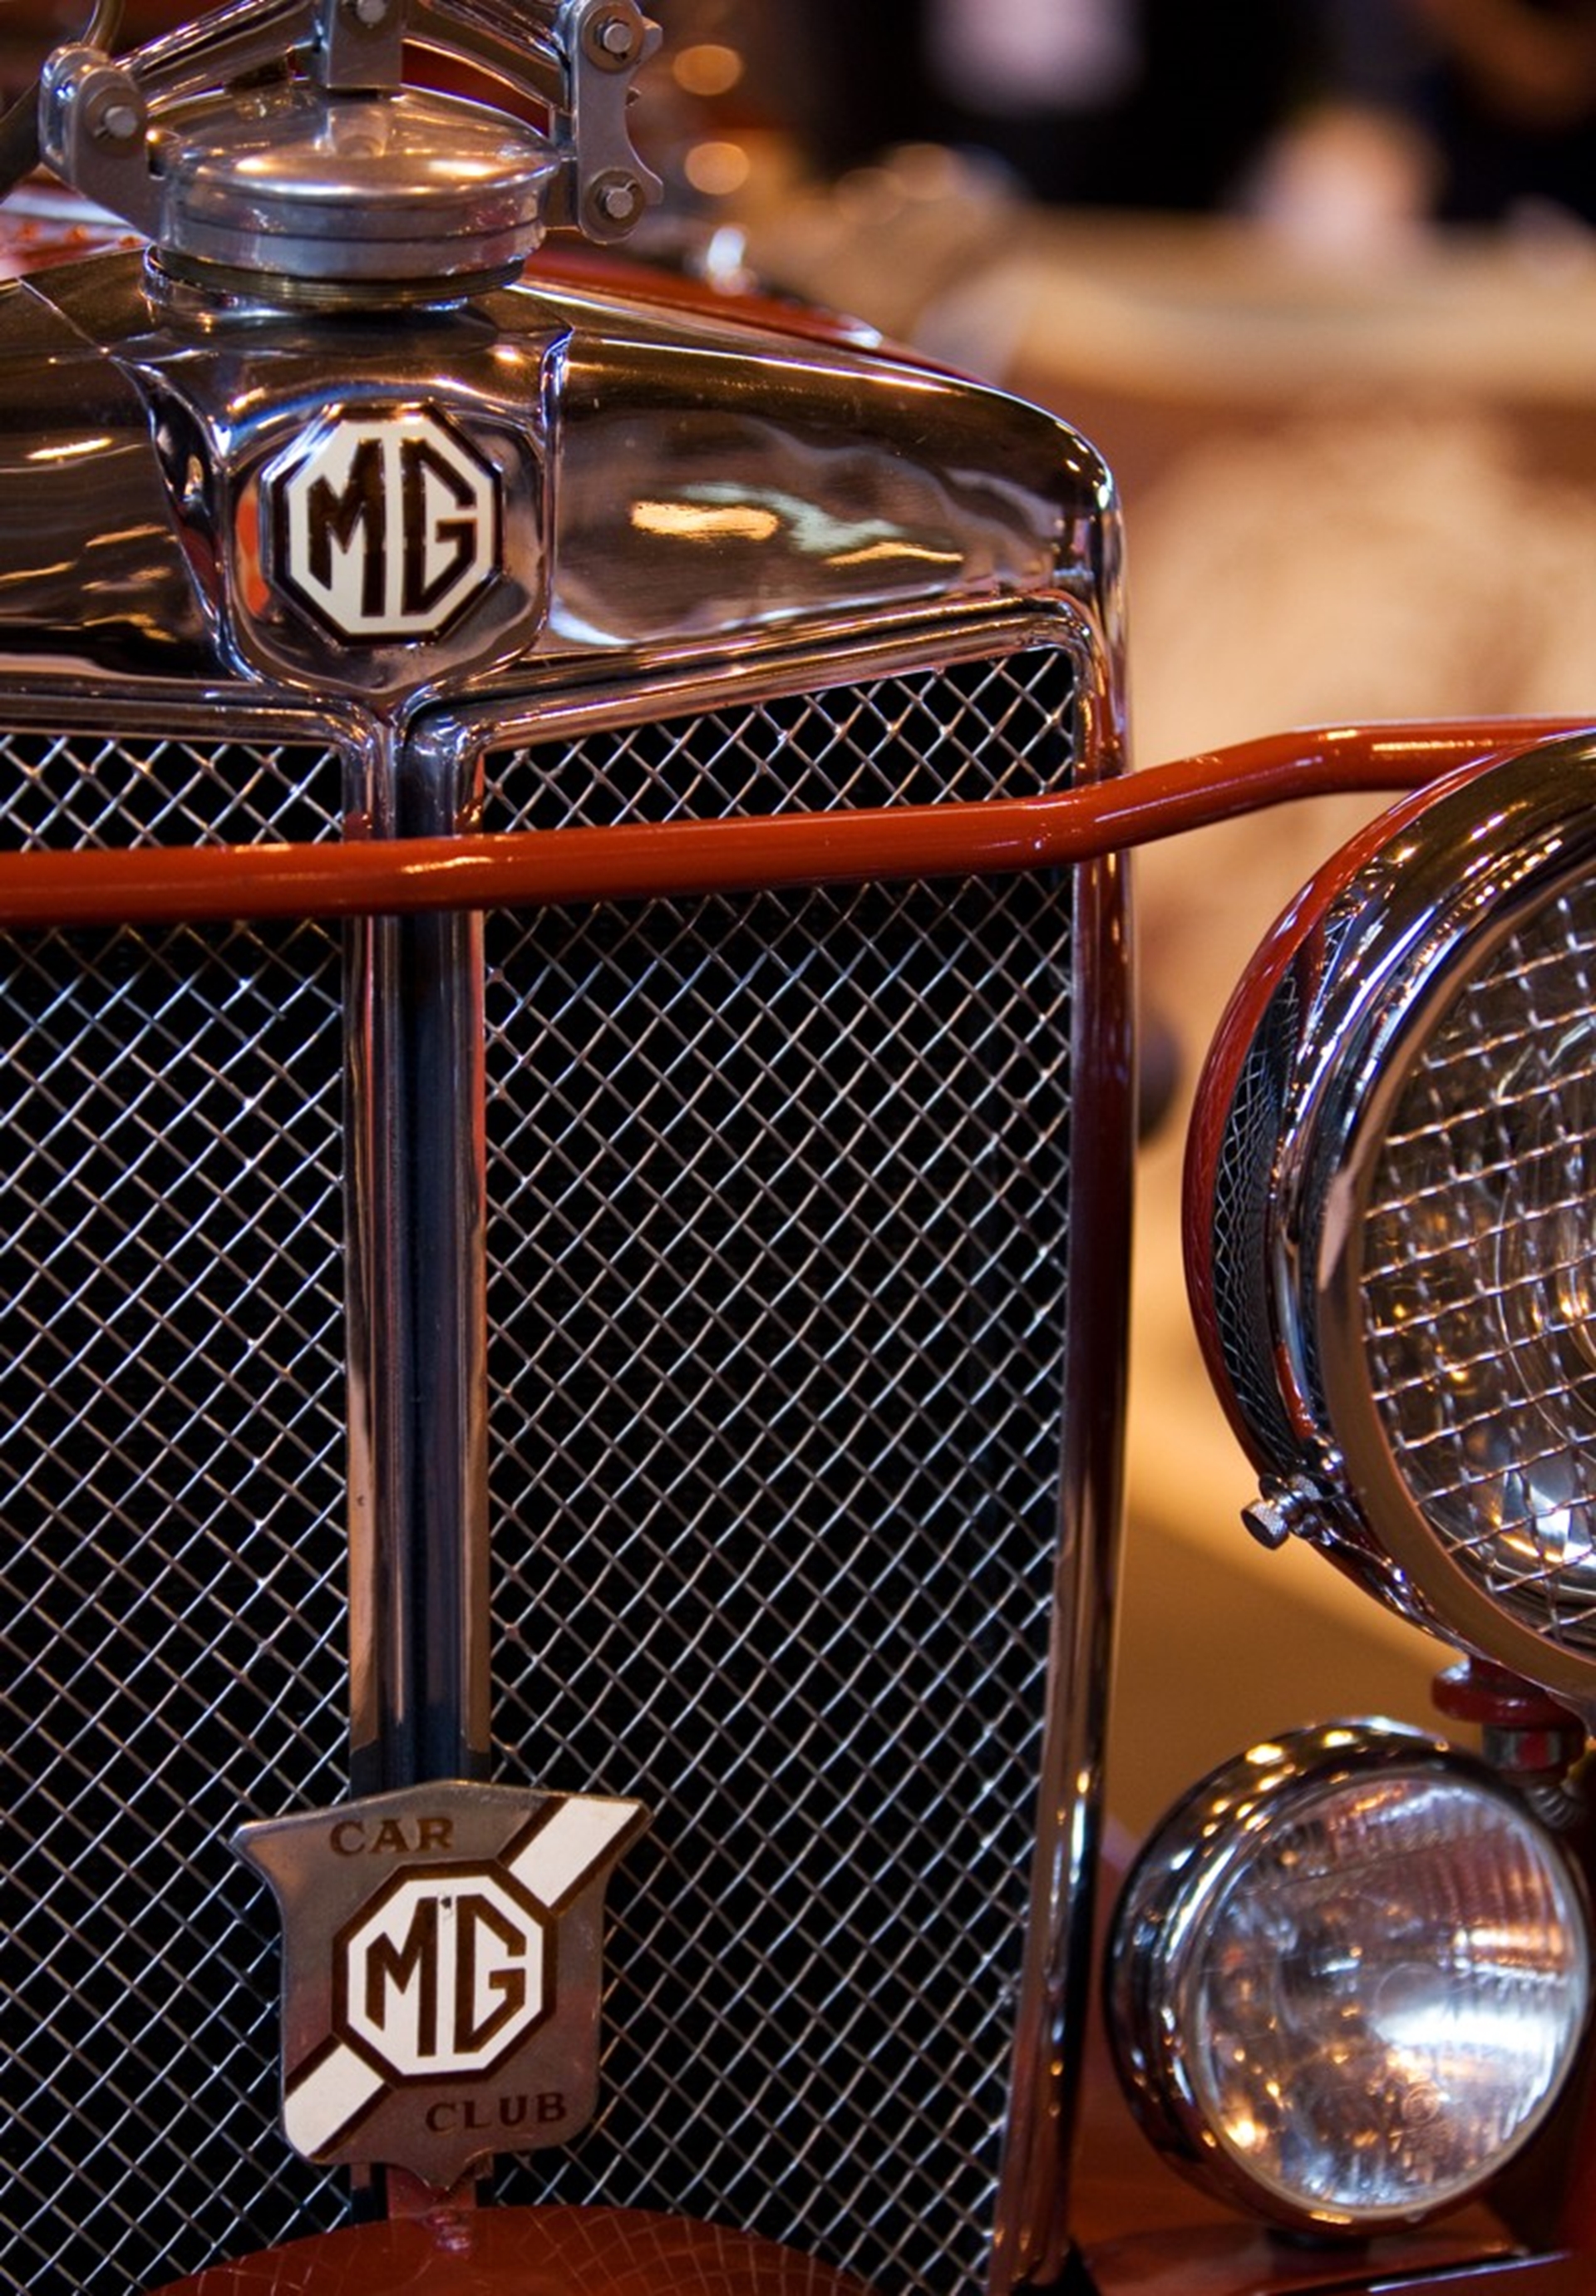 JOIN US FOR AN MG CELEBRATION AT STONELEIGH